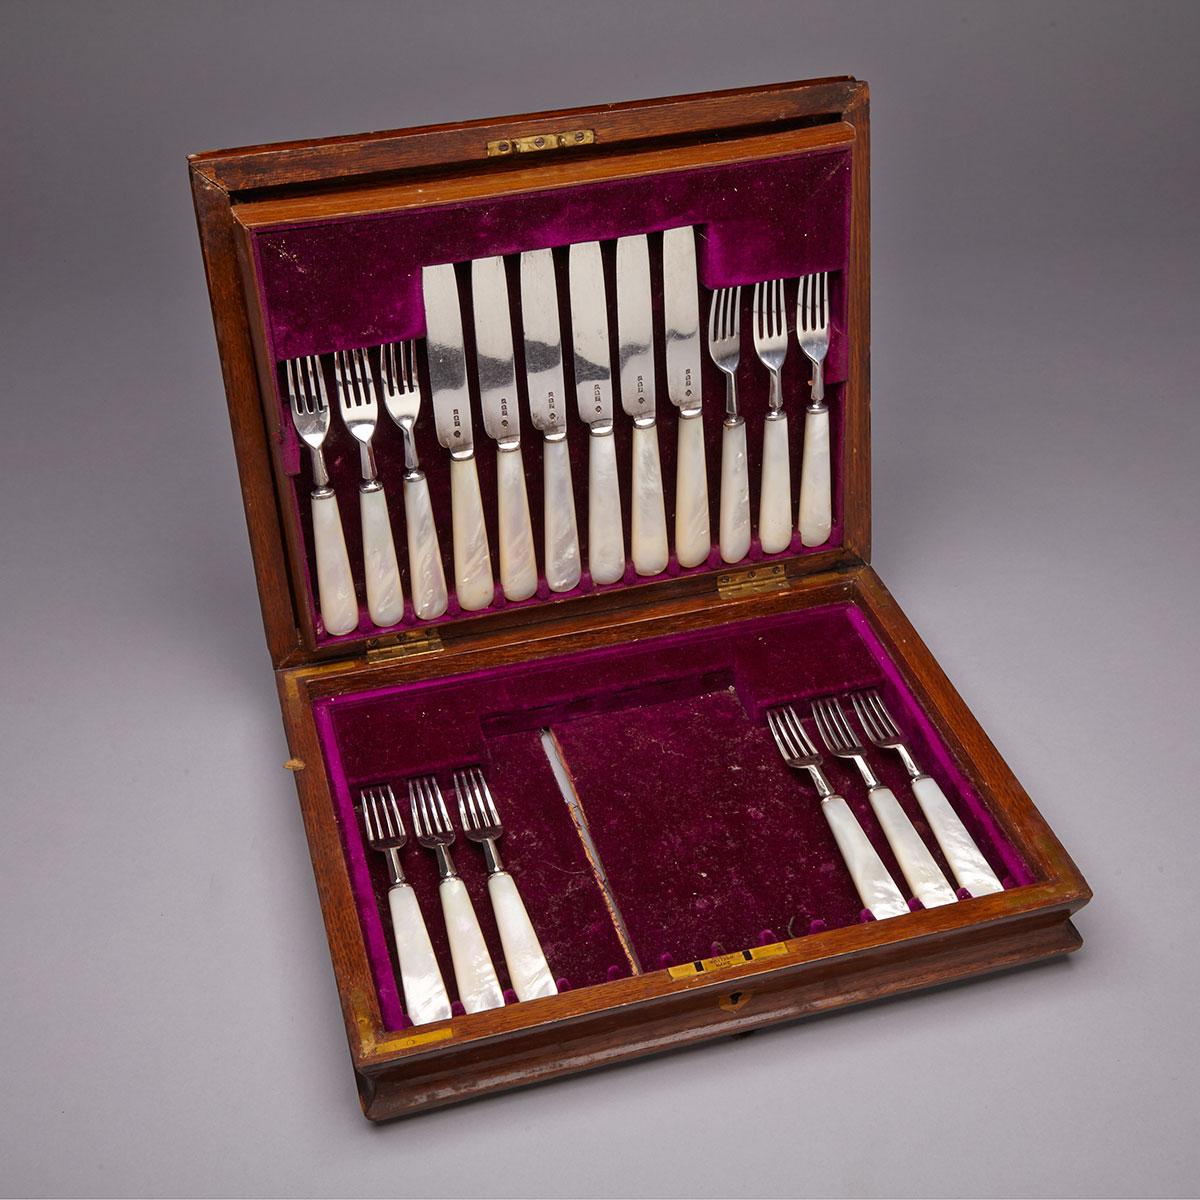 Six English Silver Dessert Knives and Twelve Forks, William Hutton & Sons, London and Sheffield, 1909/10